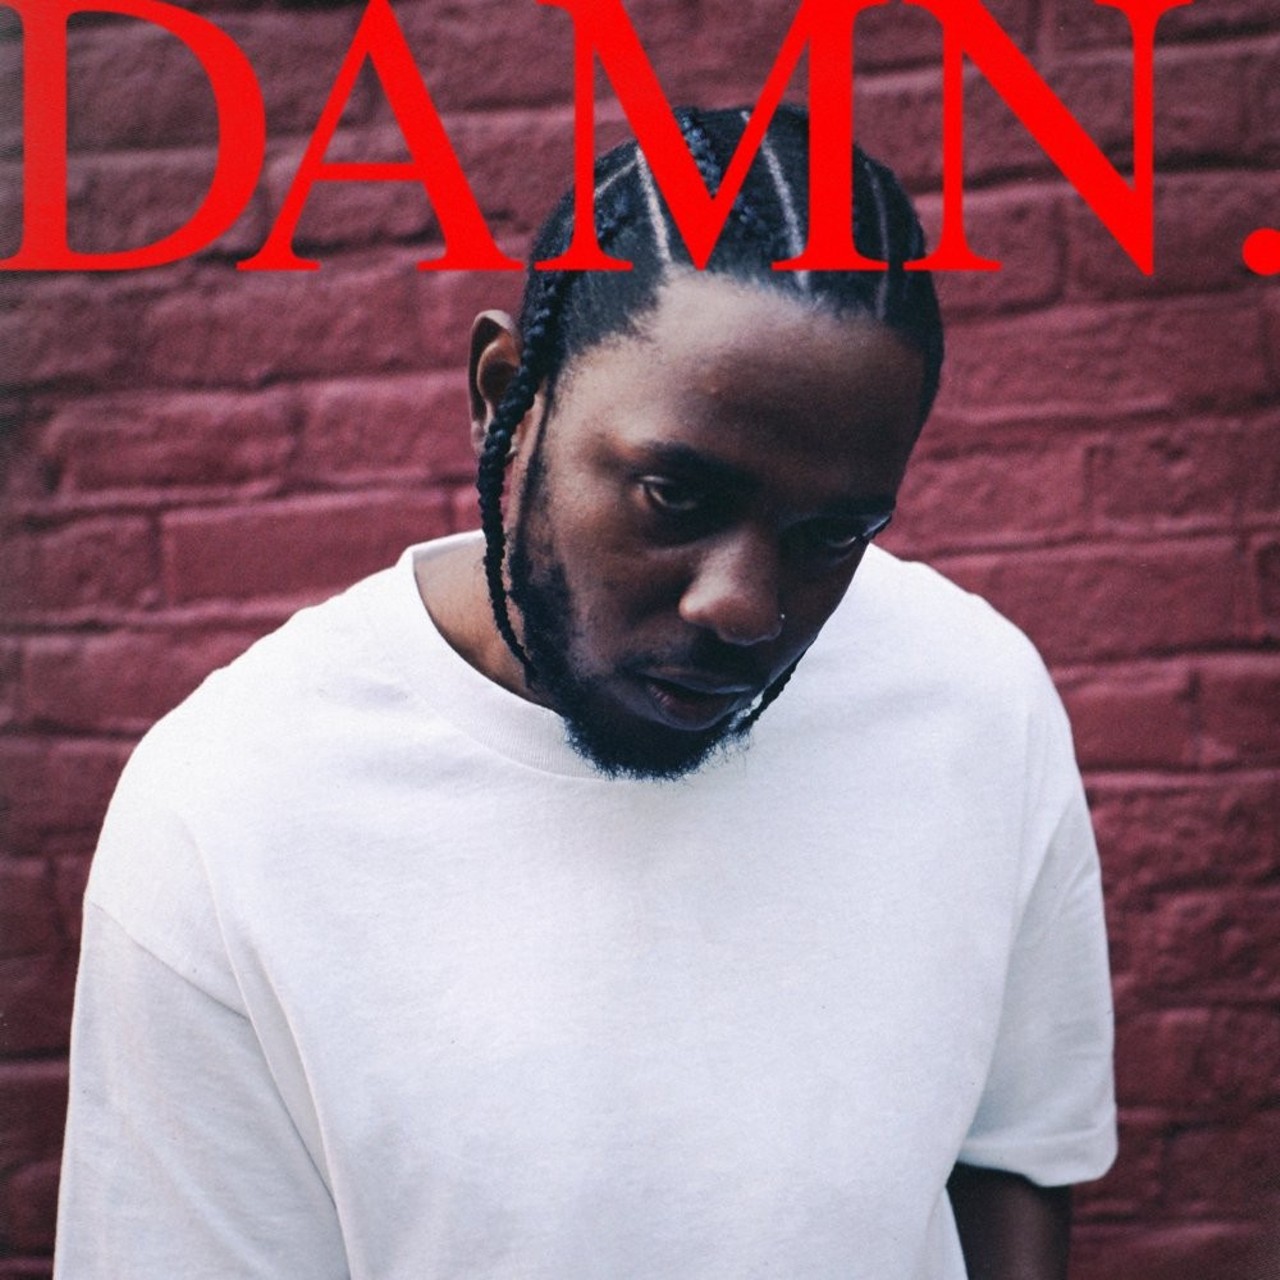 2. Kendrick Lamar | DAMN.
From the corner store to the gates of heaven, both sin and salvation clash within a tormented Kendrick Lamar on DAMN. A balance of sentimentality and self-examination, DAMN. might not be as groove-driven as his last effort, 2015's To Pimp a Butterfly, but Lamar's unmatched lyrical stamina is on full display here.
The underlying introspection on DAMN. is far more complex and emotive than the hype that comes with being a Kendrick Lamar record, too &#151; the record is as hype as it is socially relevant and politically charged.
Listen to: The entire album backward. Seriously.
Use this lyric on your next Instagram post for the haters: "I feel like debating on who the greatest can stop it/ I am legend, I feel like all of y'all is peasants/ I feel like all of y'all is desperate/ I feel like all it take is a second to feel like/ Mike Jordan whenever holdin' a real mic/ I ain't feelin' your presence/ Feel like I'ma learn you a lesson."